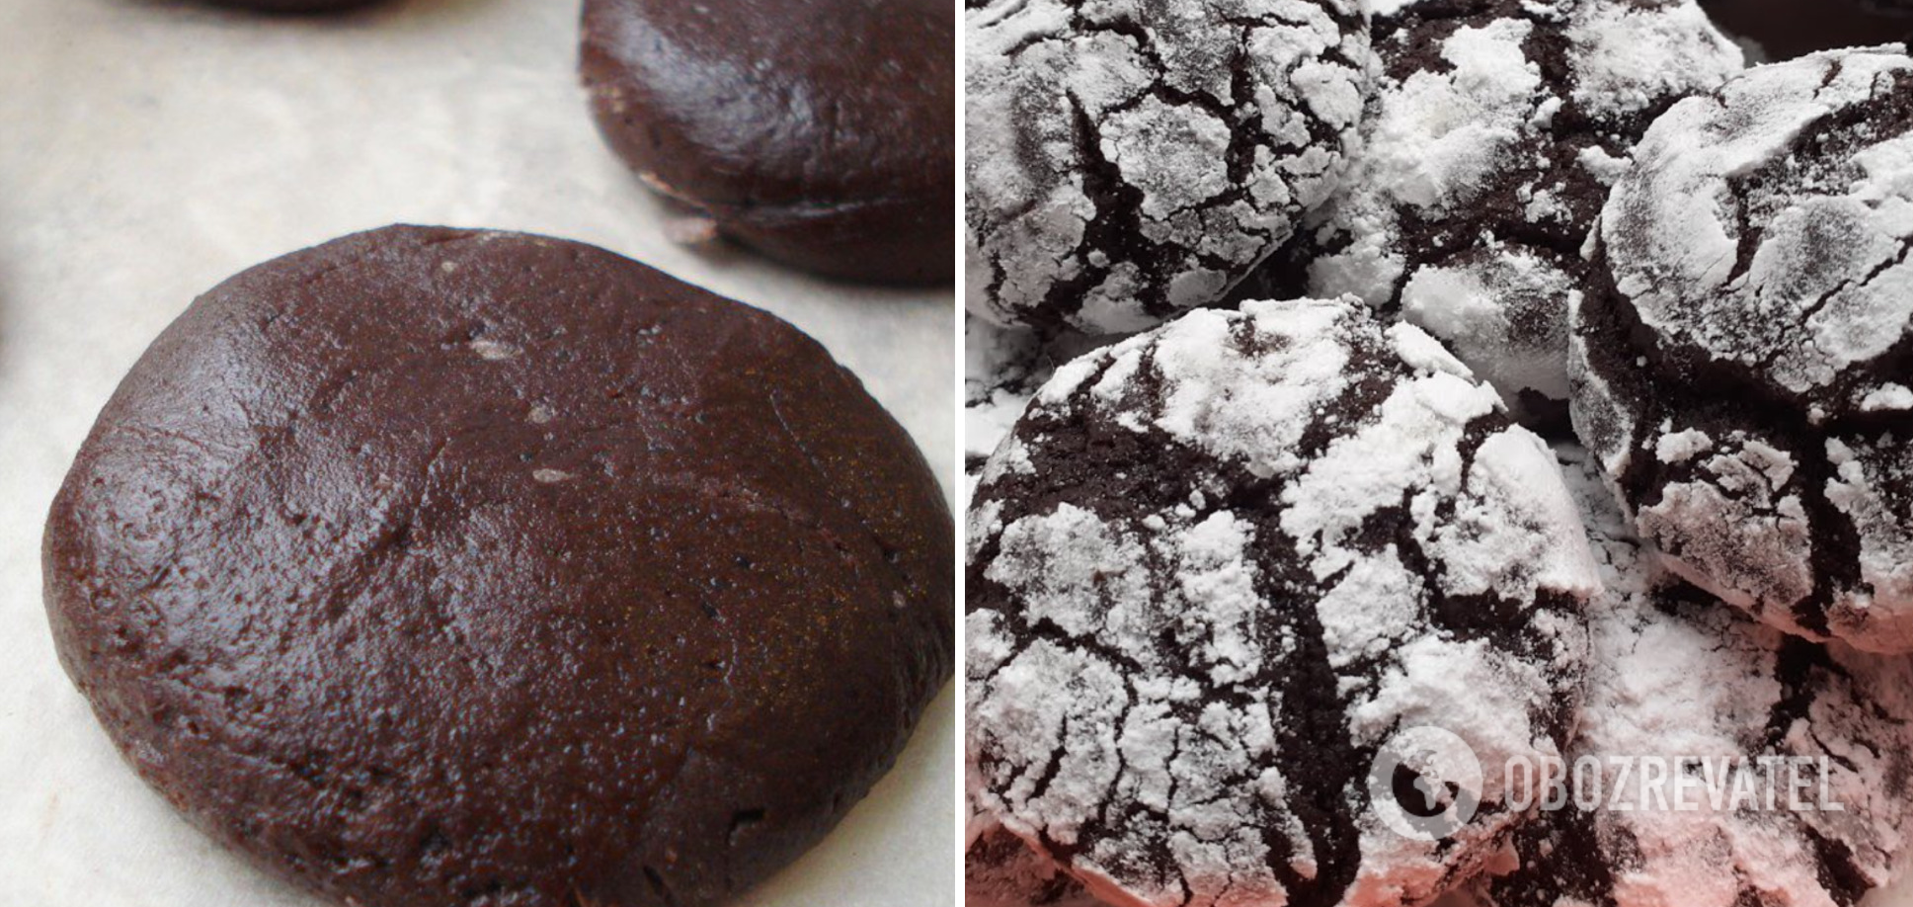 Cookies with perfect cracks: how to cook them properly